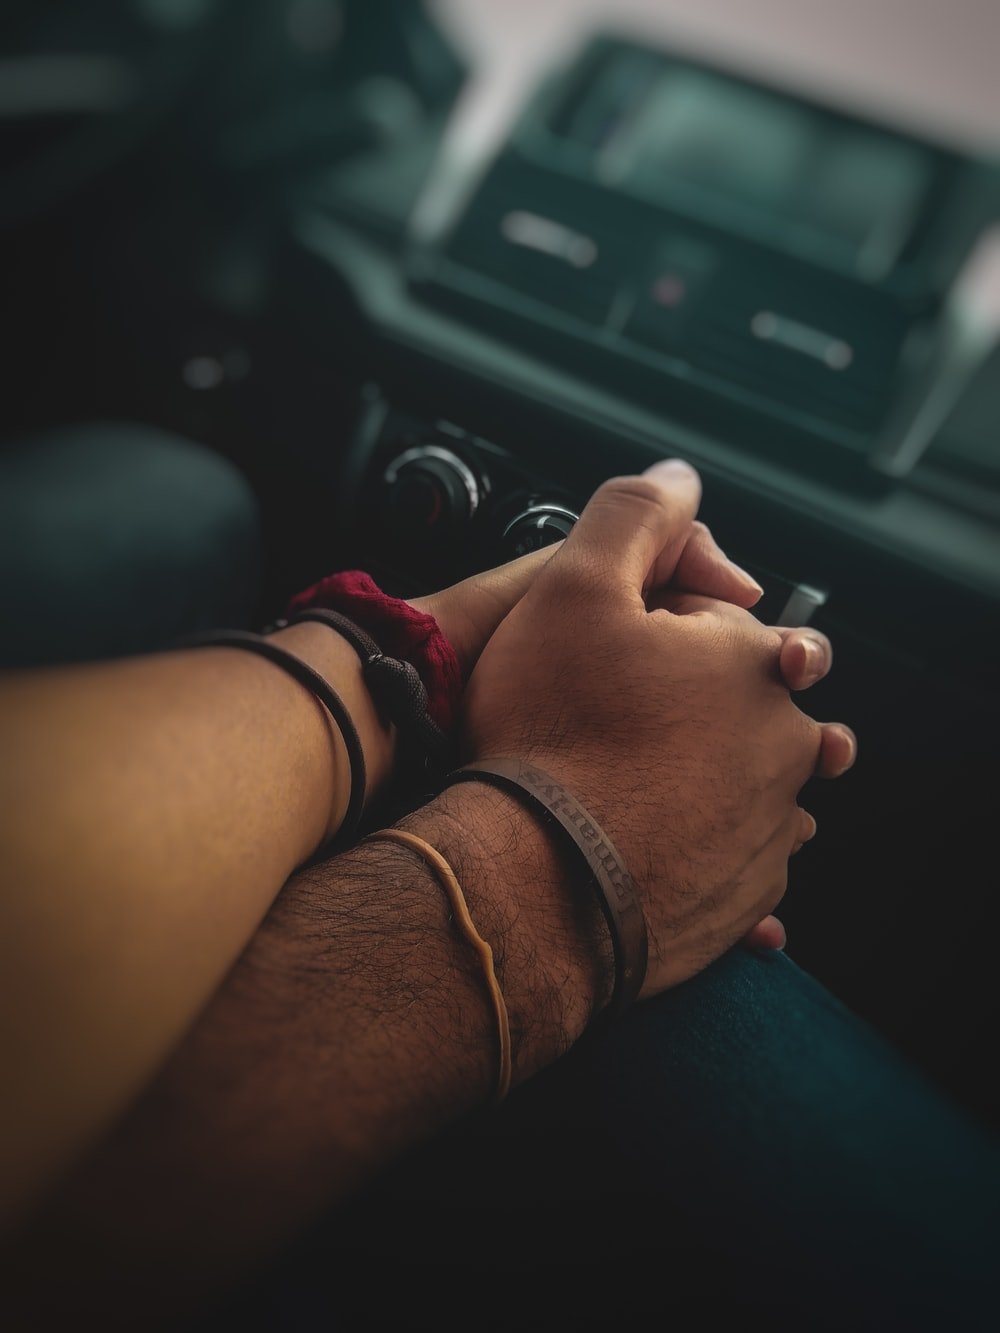 Couple Holding Hands Picture. Download Free Image